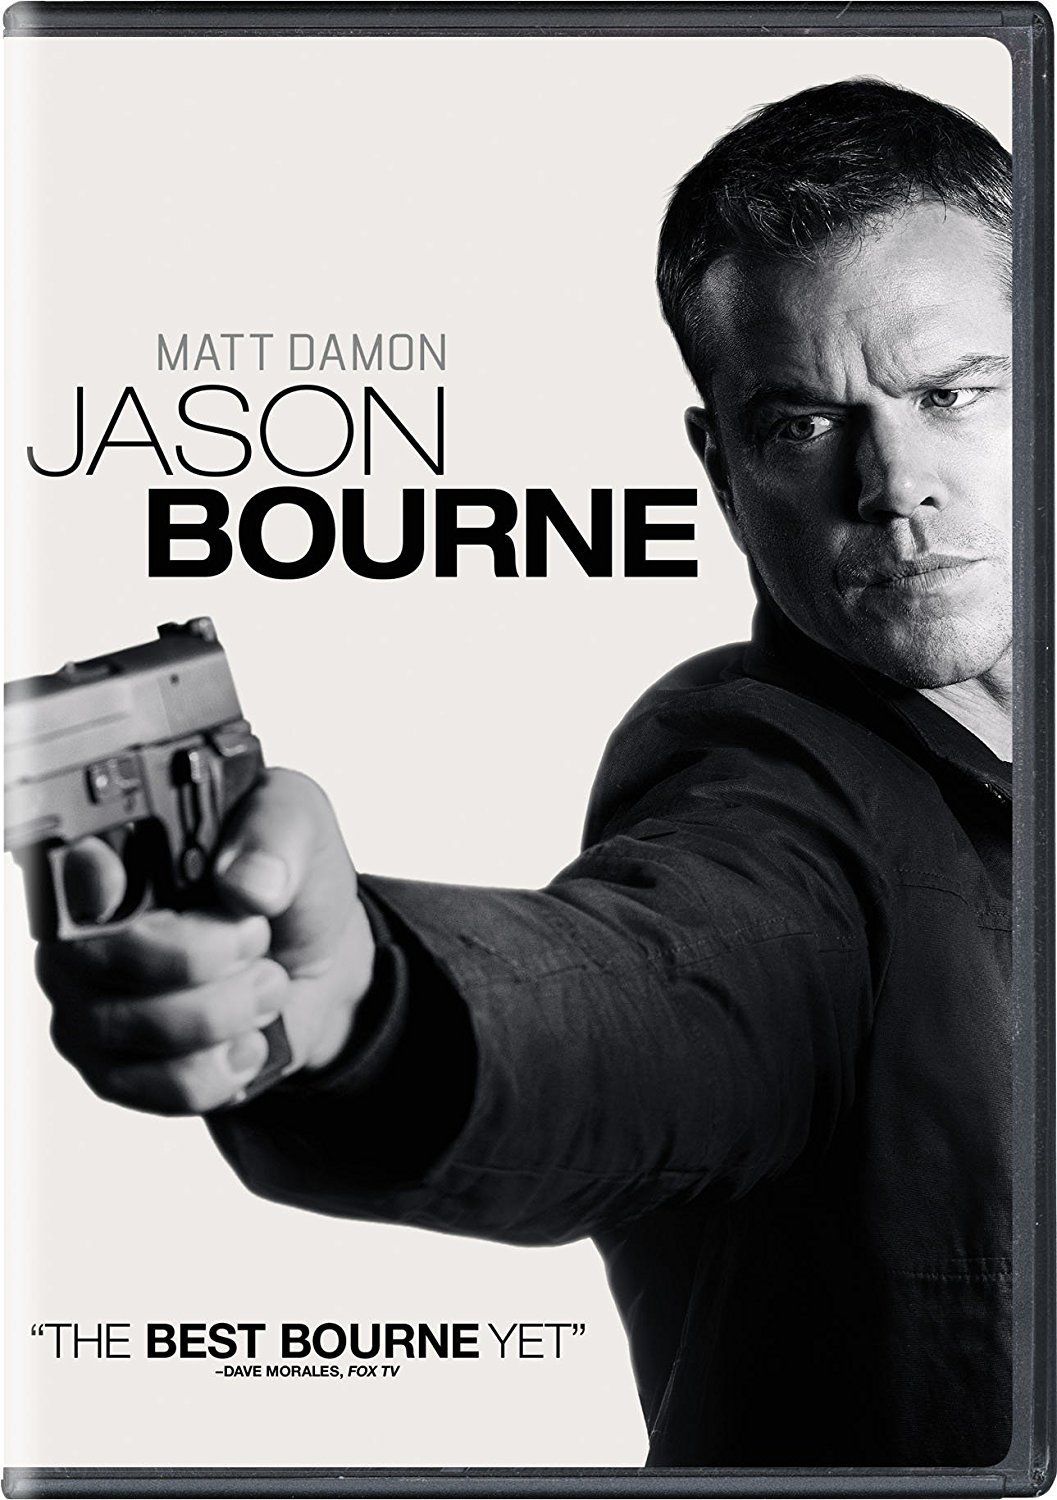 how many jason bourne movies have there been